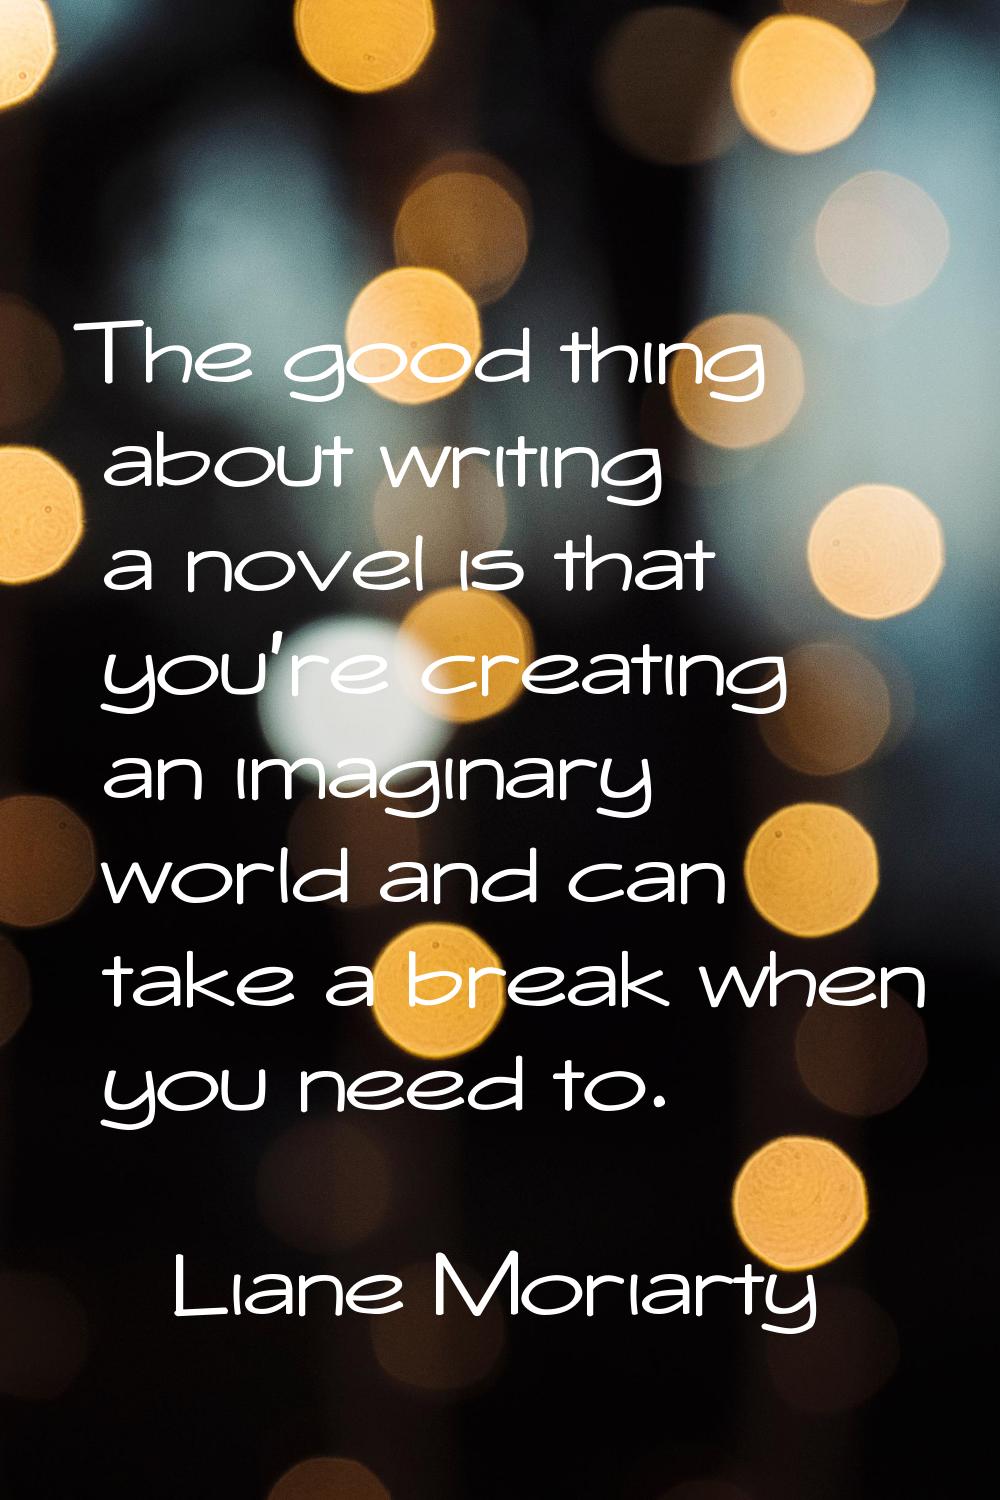 The good thing about writing a novel is that you're creating an imaginary world and can take a brea